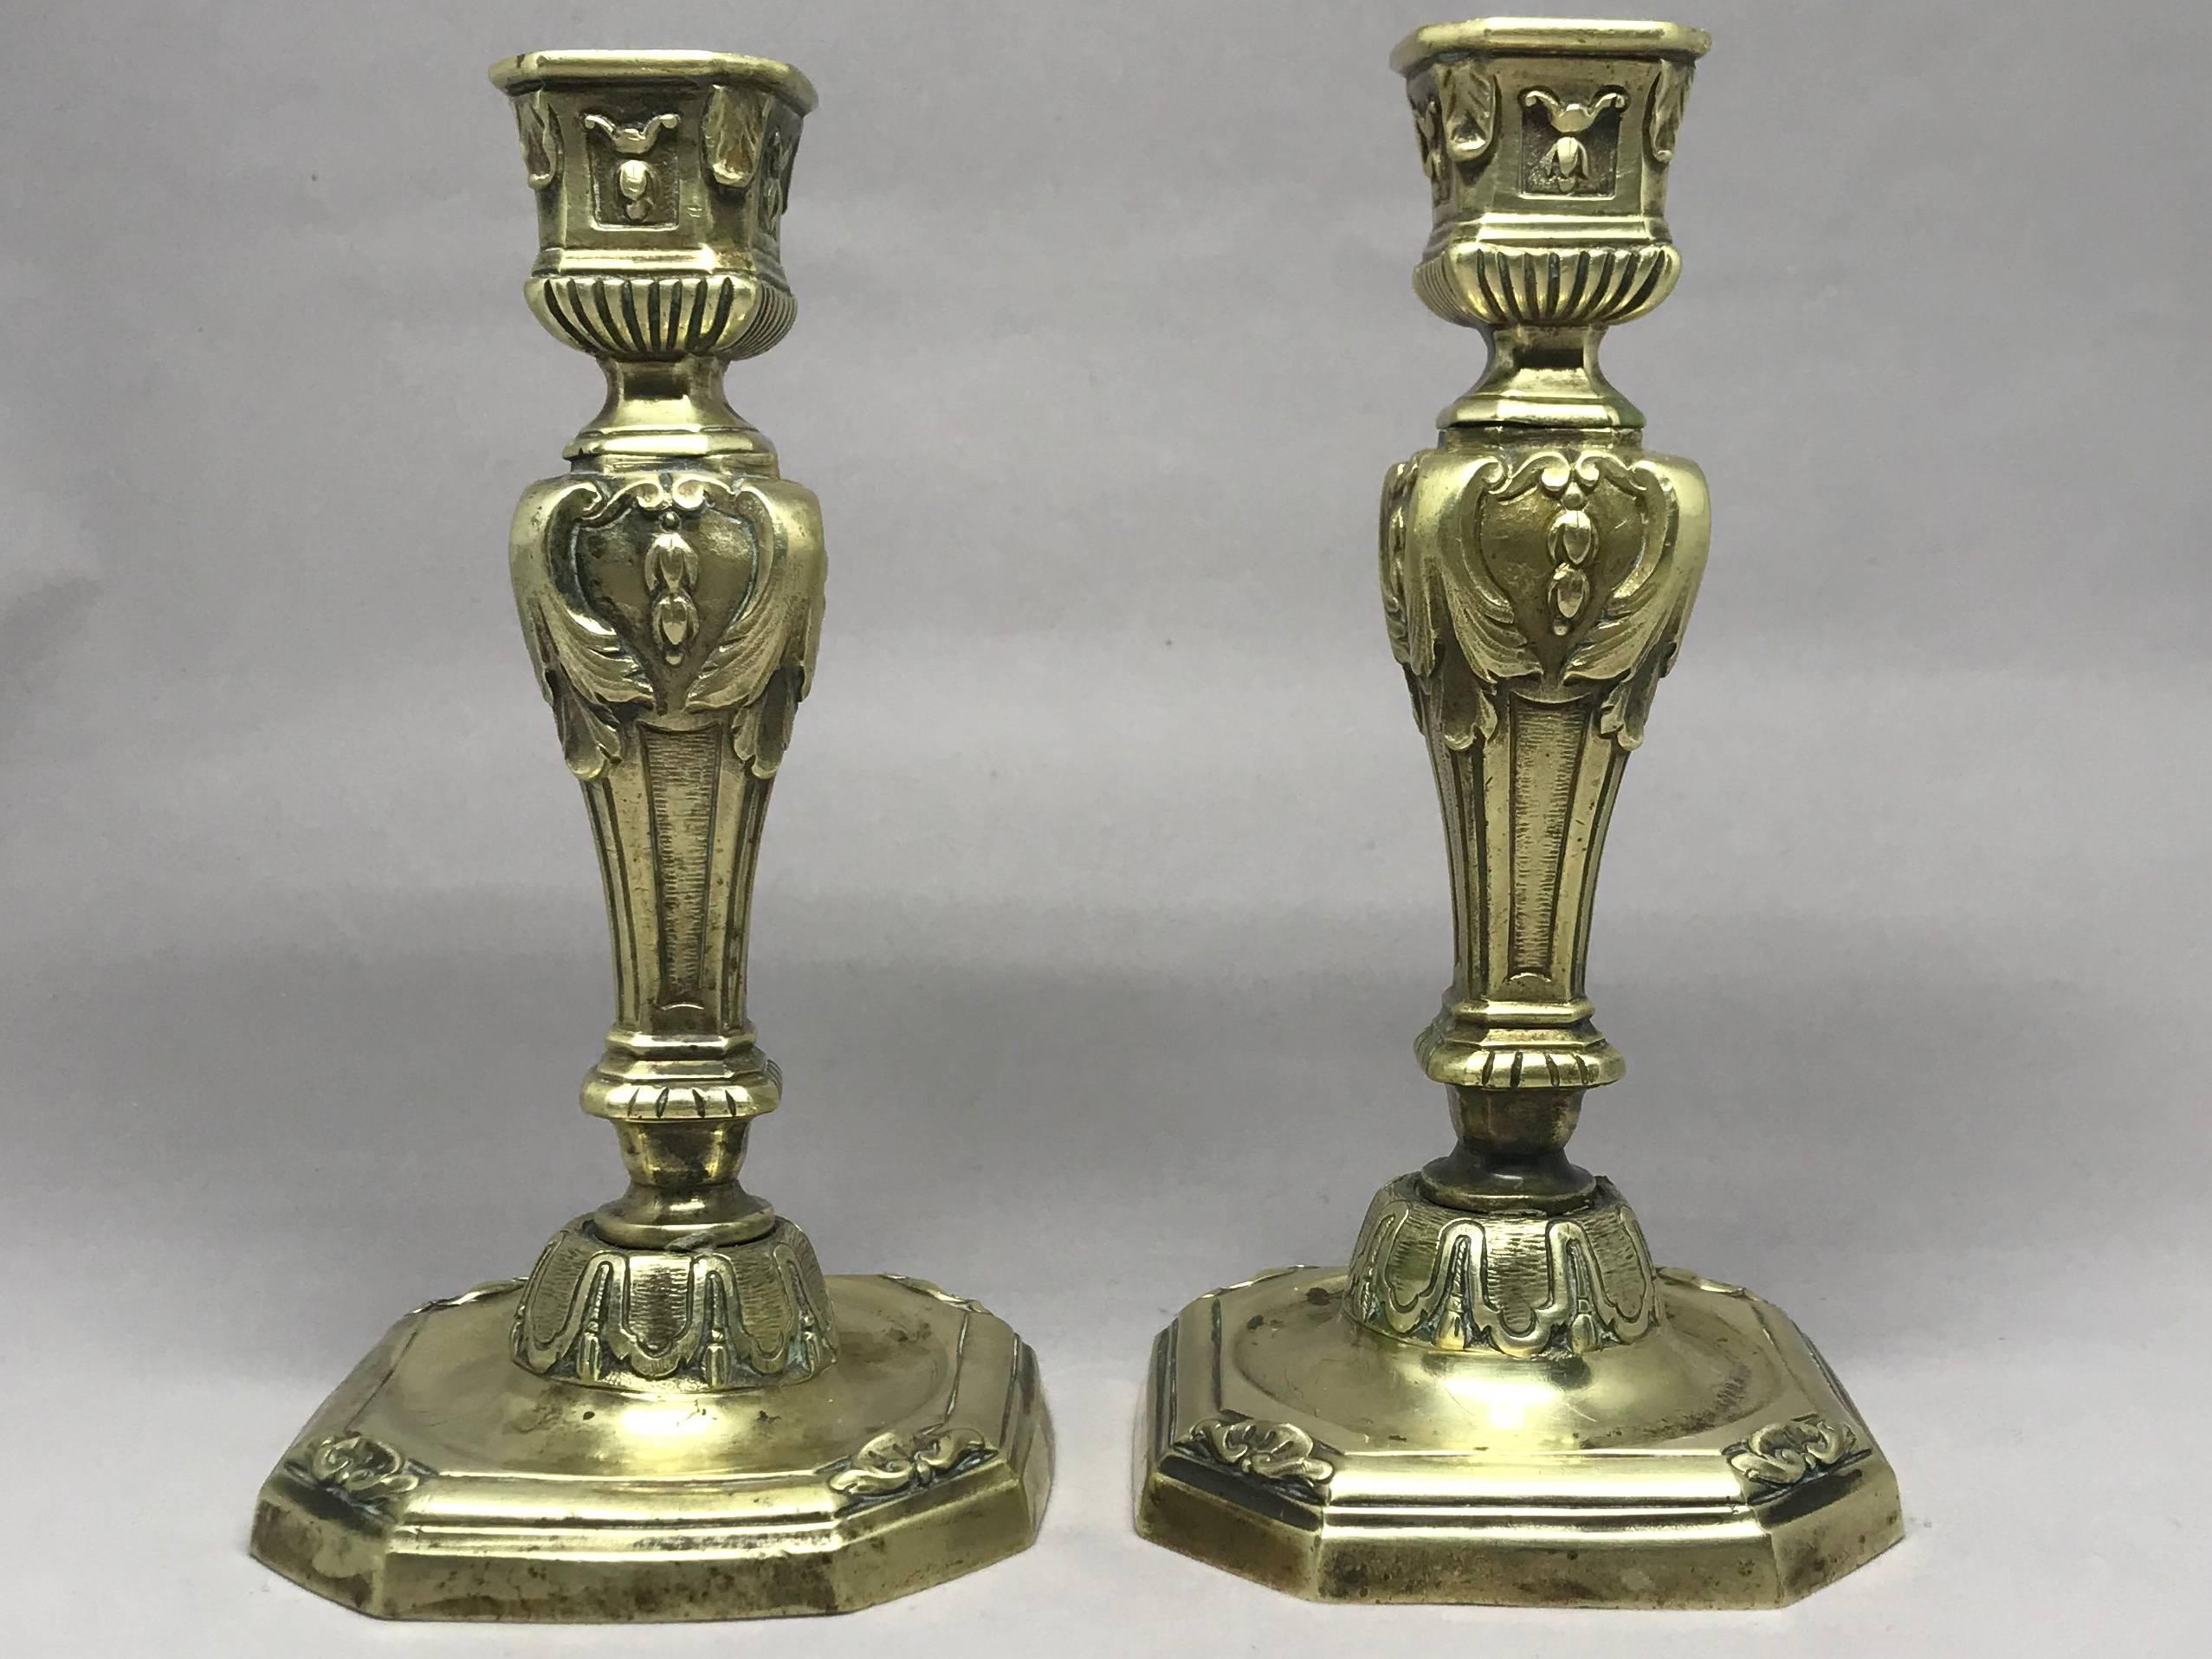 Pair of Louis XIV candlesticks. Louis Quatorze heavy brass candlesticks in three parts, their smaller size indicative of their original use on the candle slides of a bouillotte table. France, early 18th century
Dimensions: 3.25" W x 3.25"